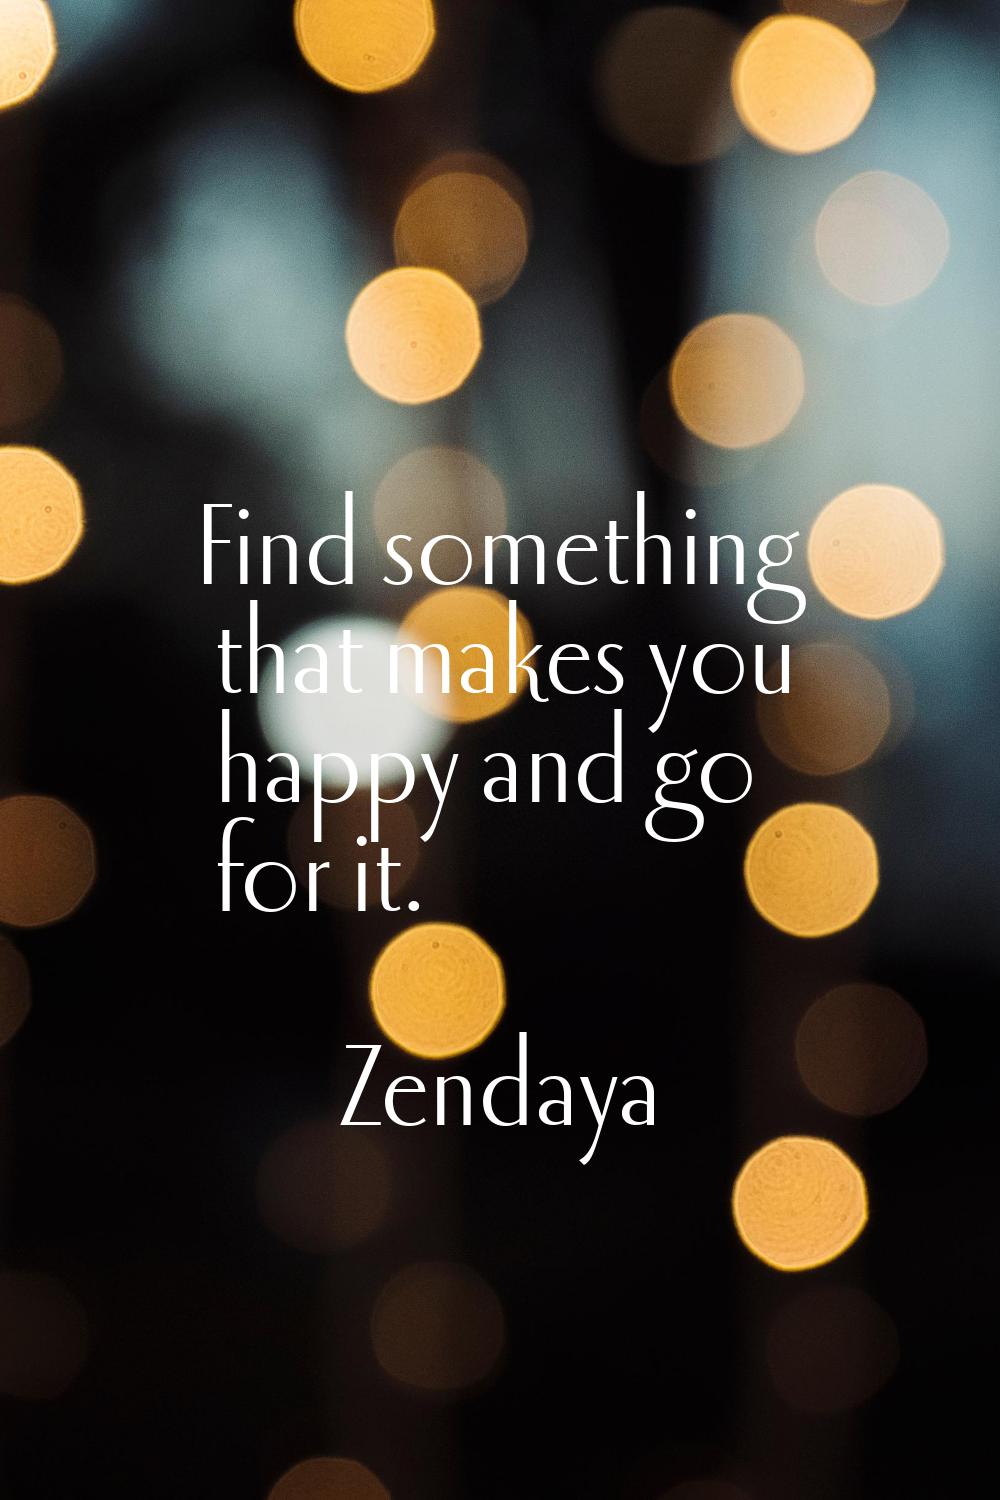 Find something that makes you happy and go for it.